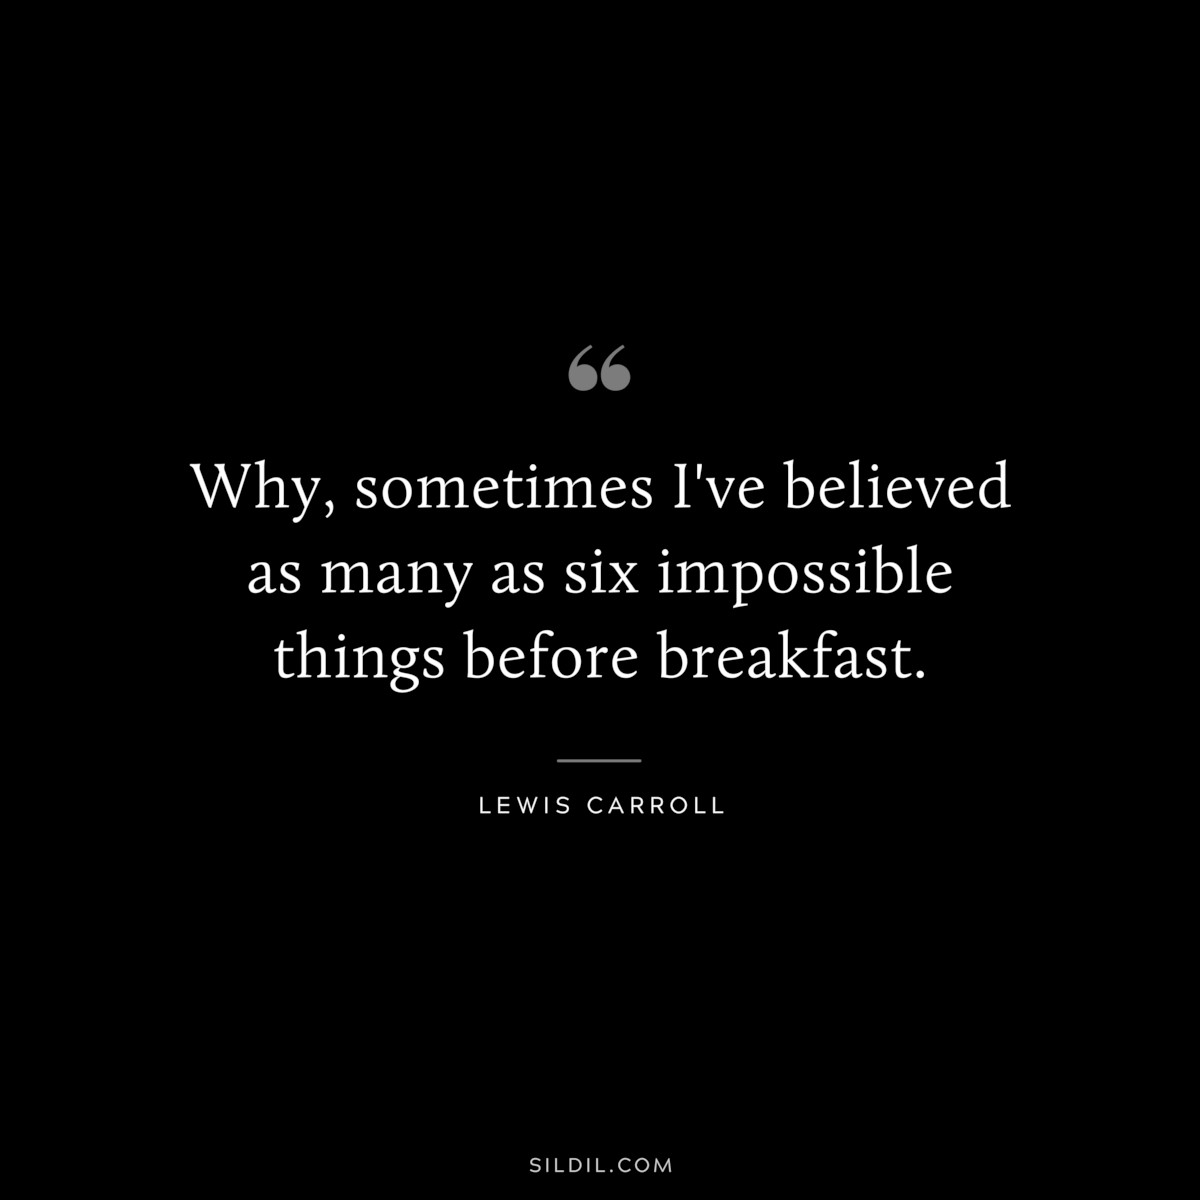 Why, sometimes I've believed as many as six impossible things before breakfast.